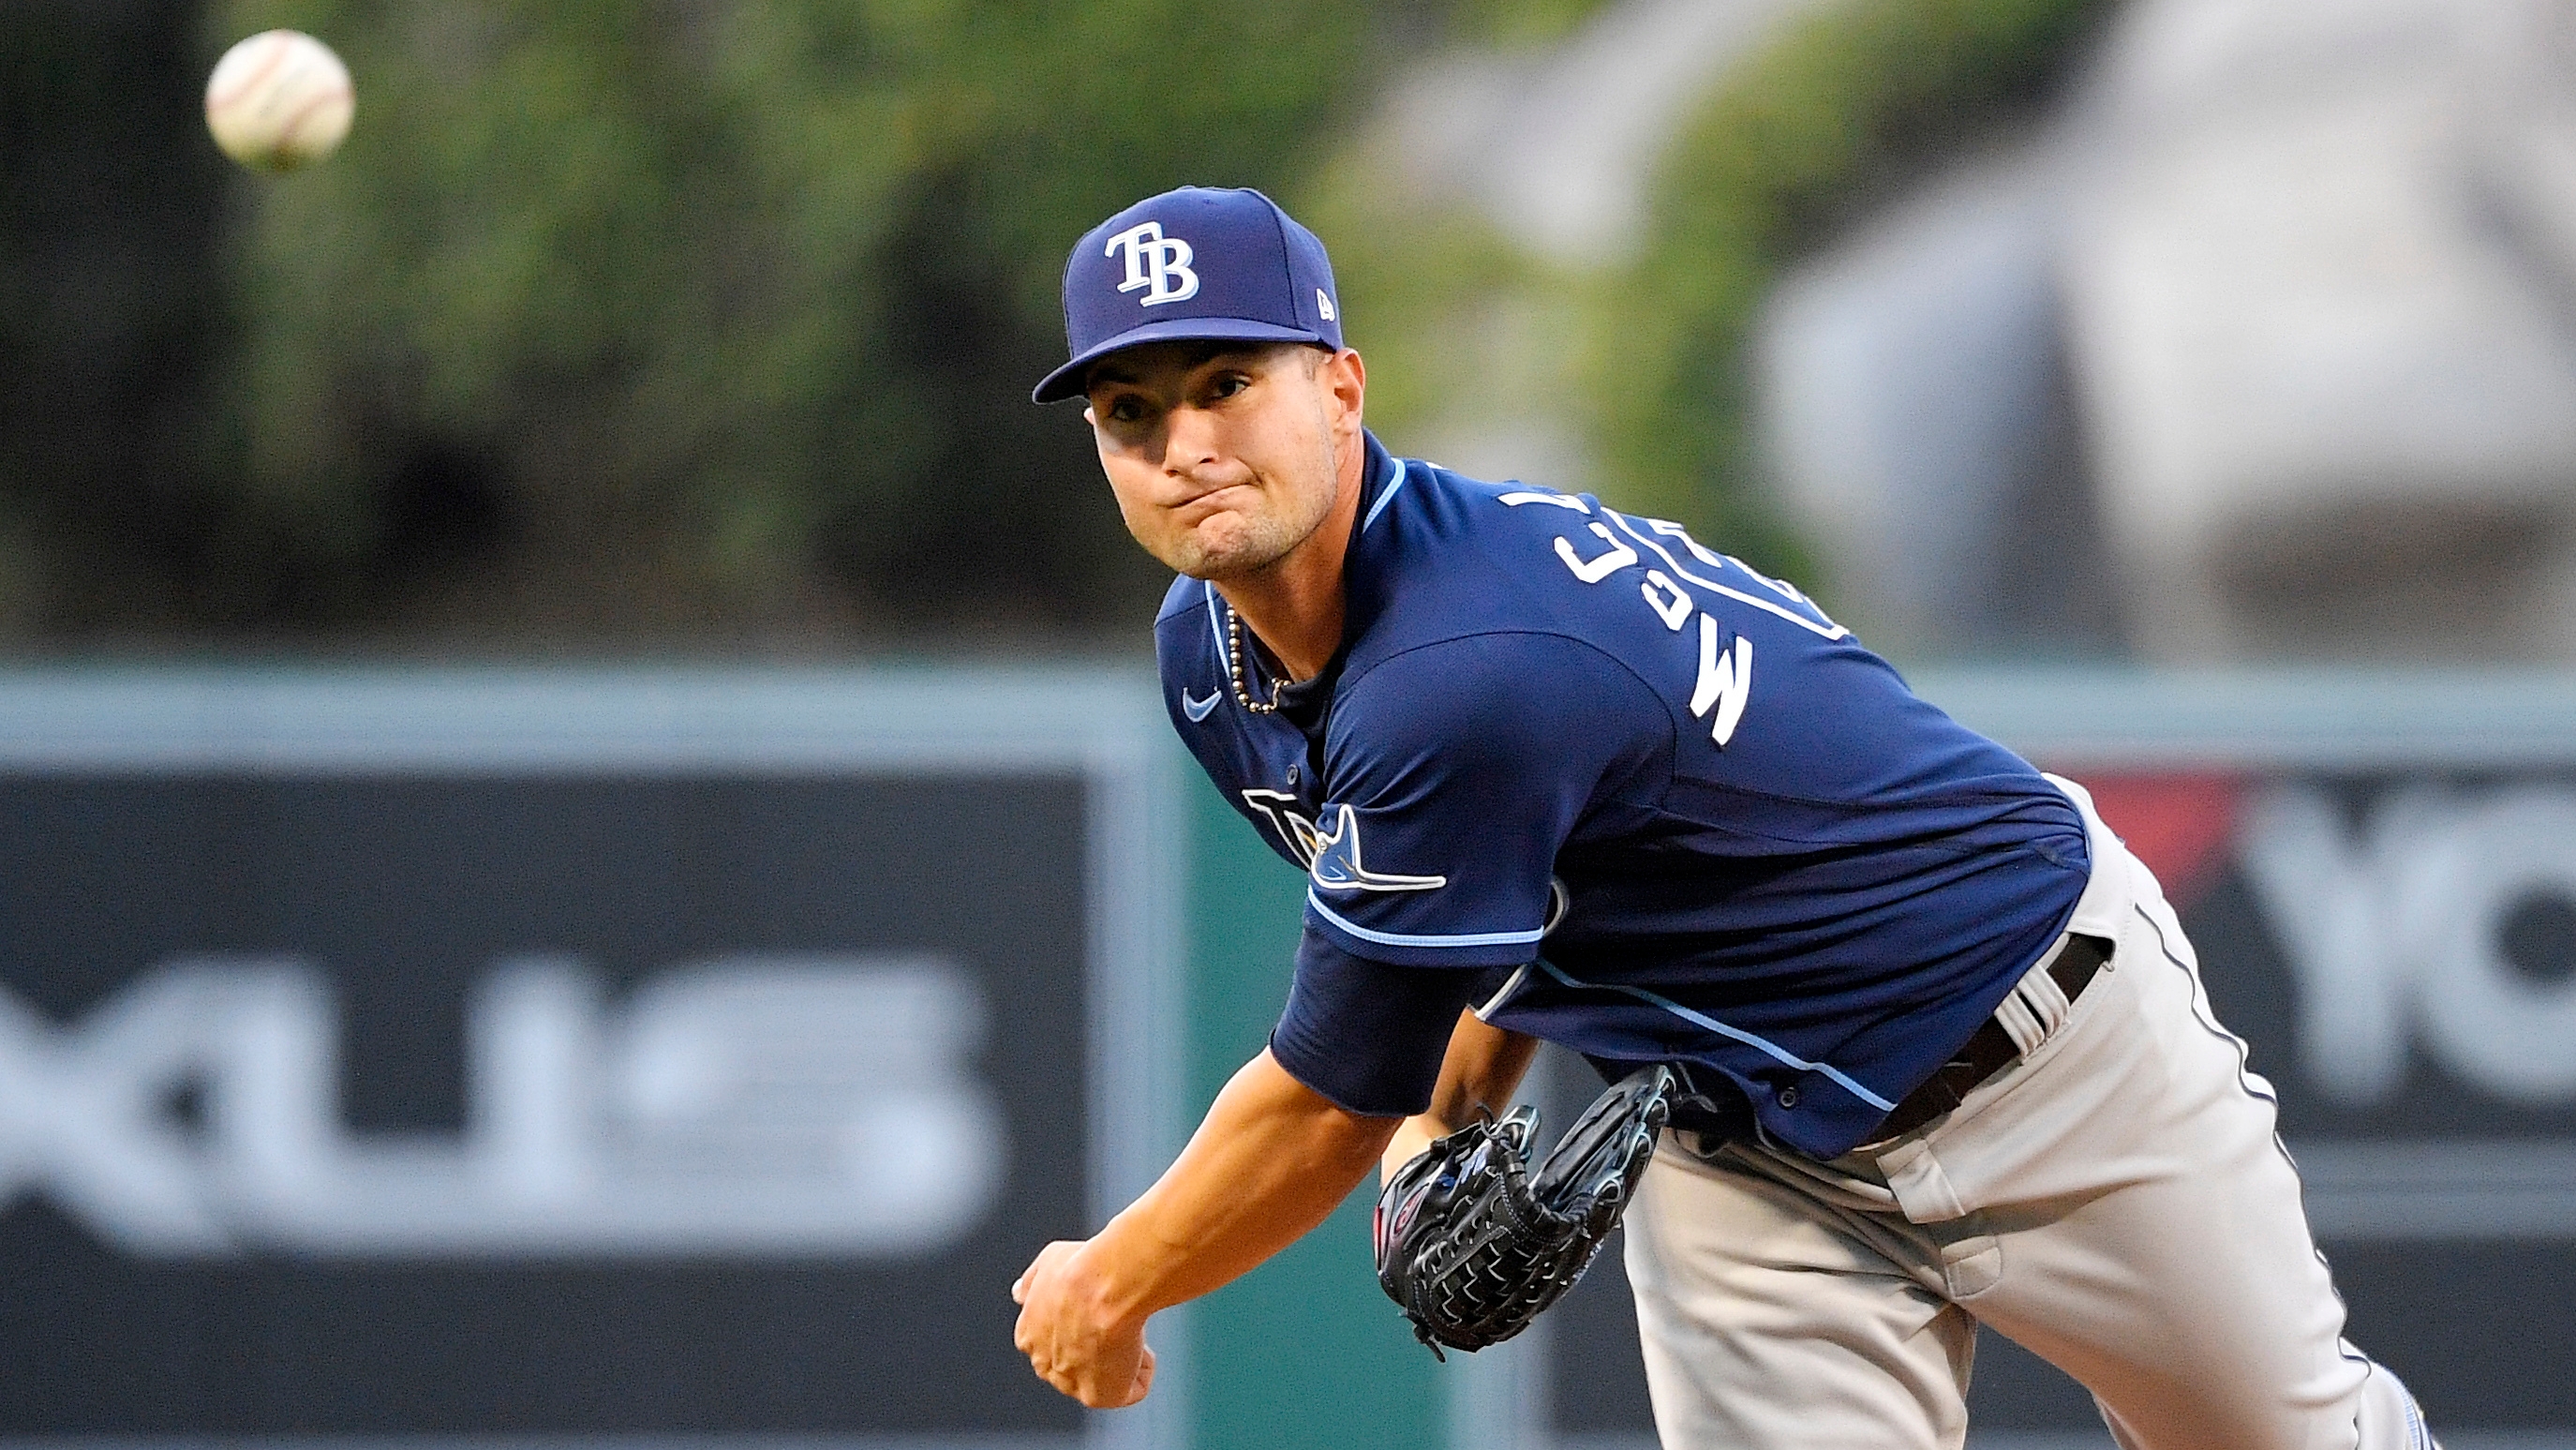 Cape Coral product, Rays pitcher Shane McClanahan makes first All